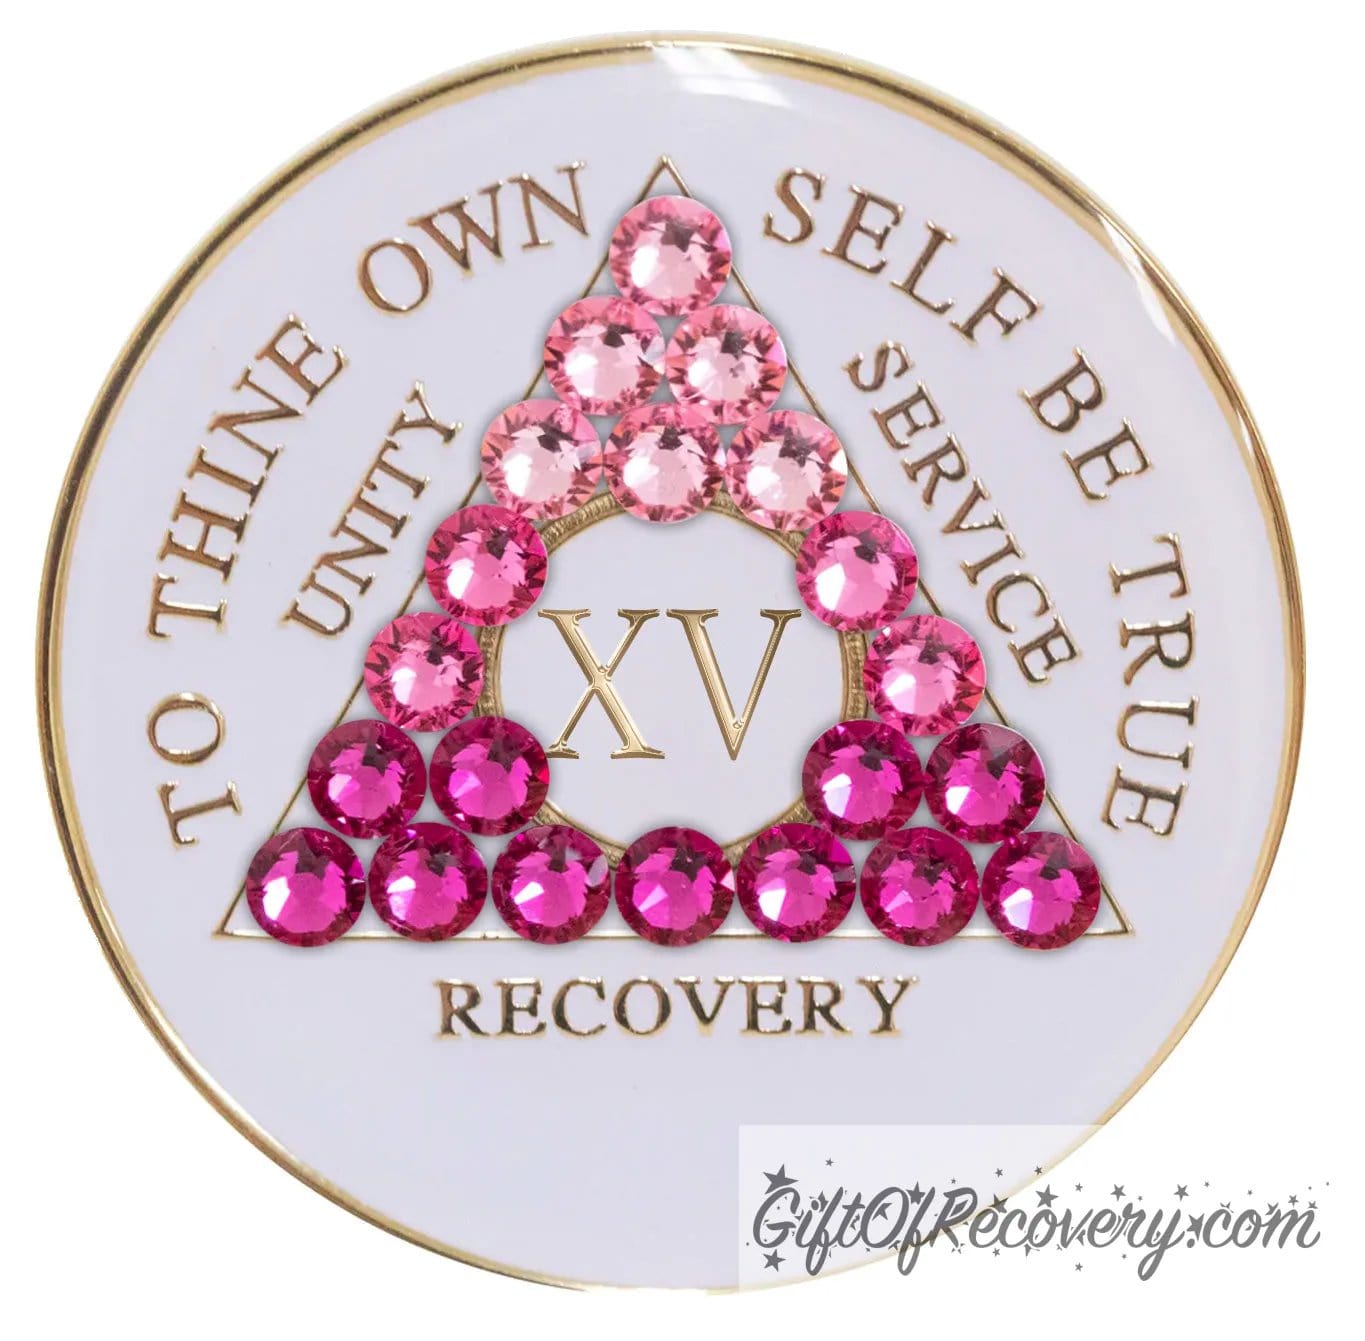 15 year pearl white AA medallion with 21 genuine crystals in the shape of the triangle and ranging from light to dark pink, representing the transformation of your sobriety journey, the AA moto along with the roman numeral and rim of medallion are 14k gold plated brass and sealed with resin for a glossy finish.